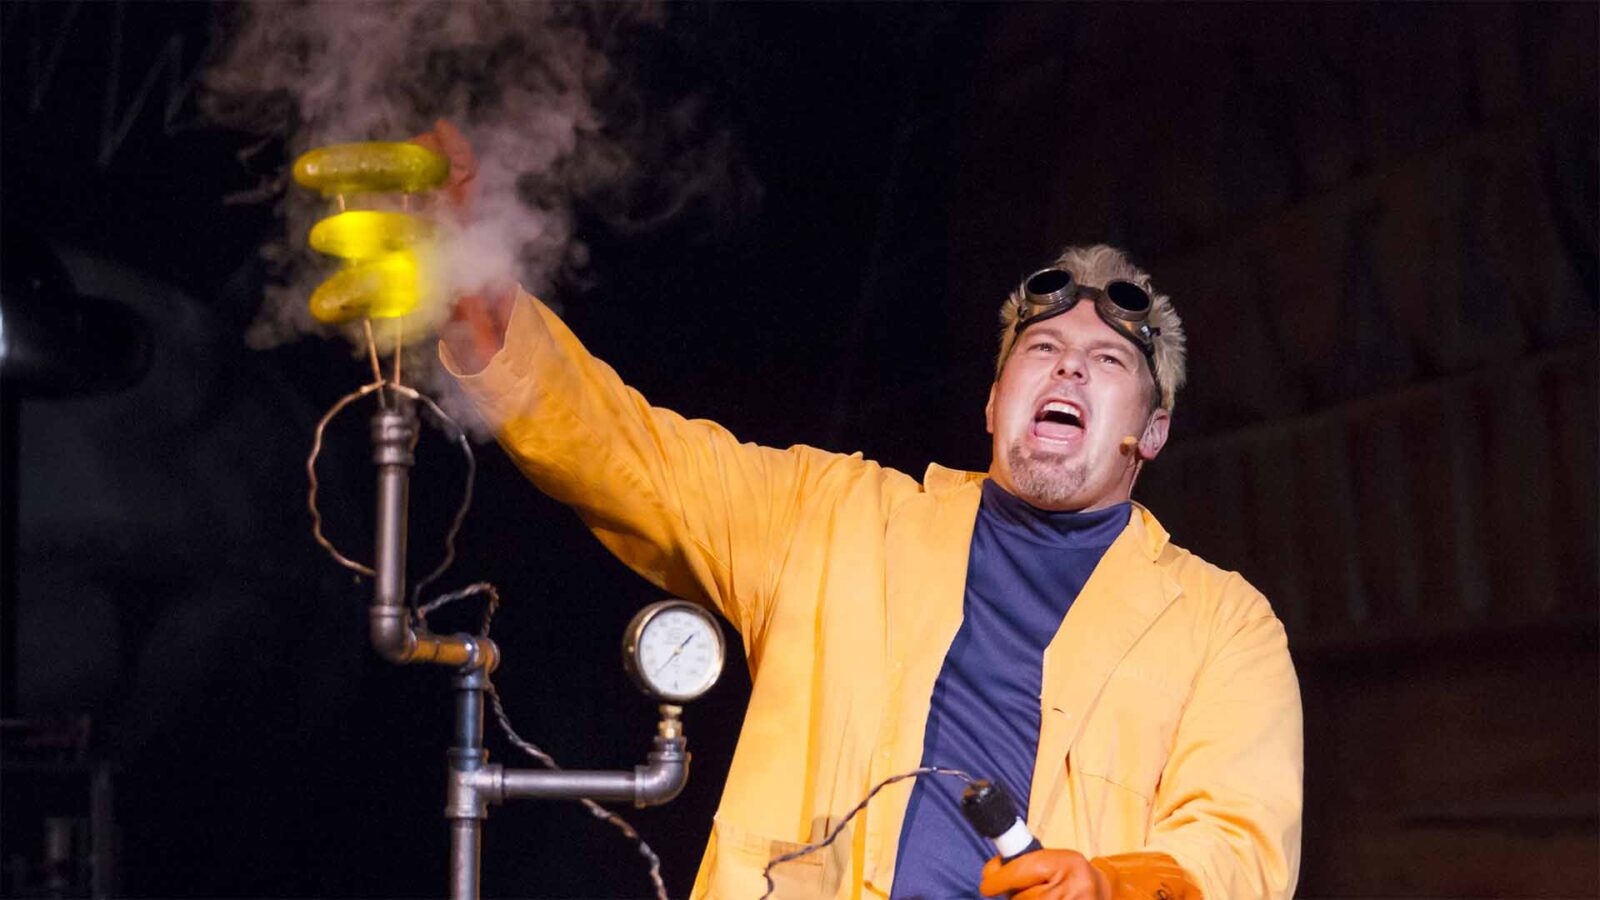 Doktor Kaboom dressed in a yellow coat, with goggles on his head and pointing to a glass tube filled with smoke as if his scientific experiments took a wrong turn.